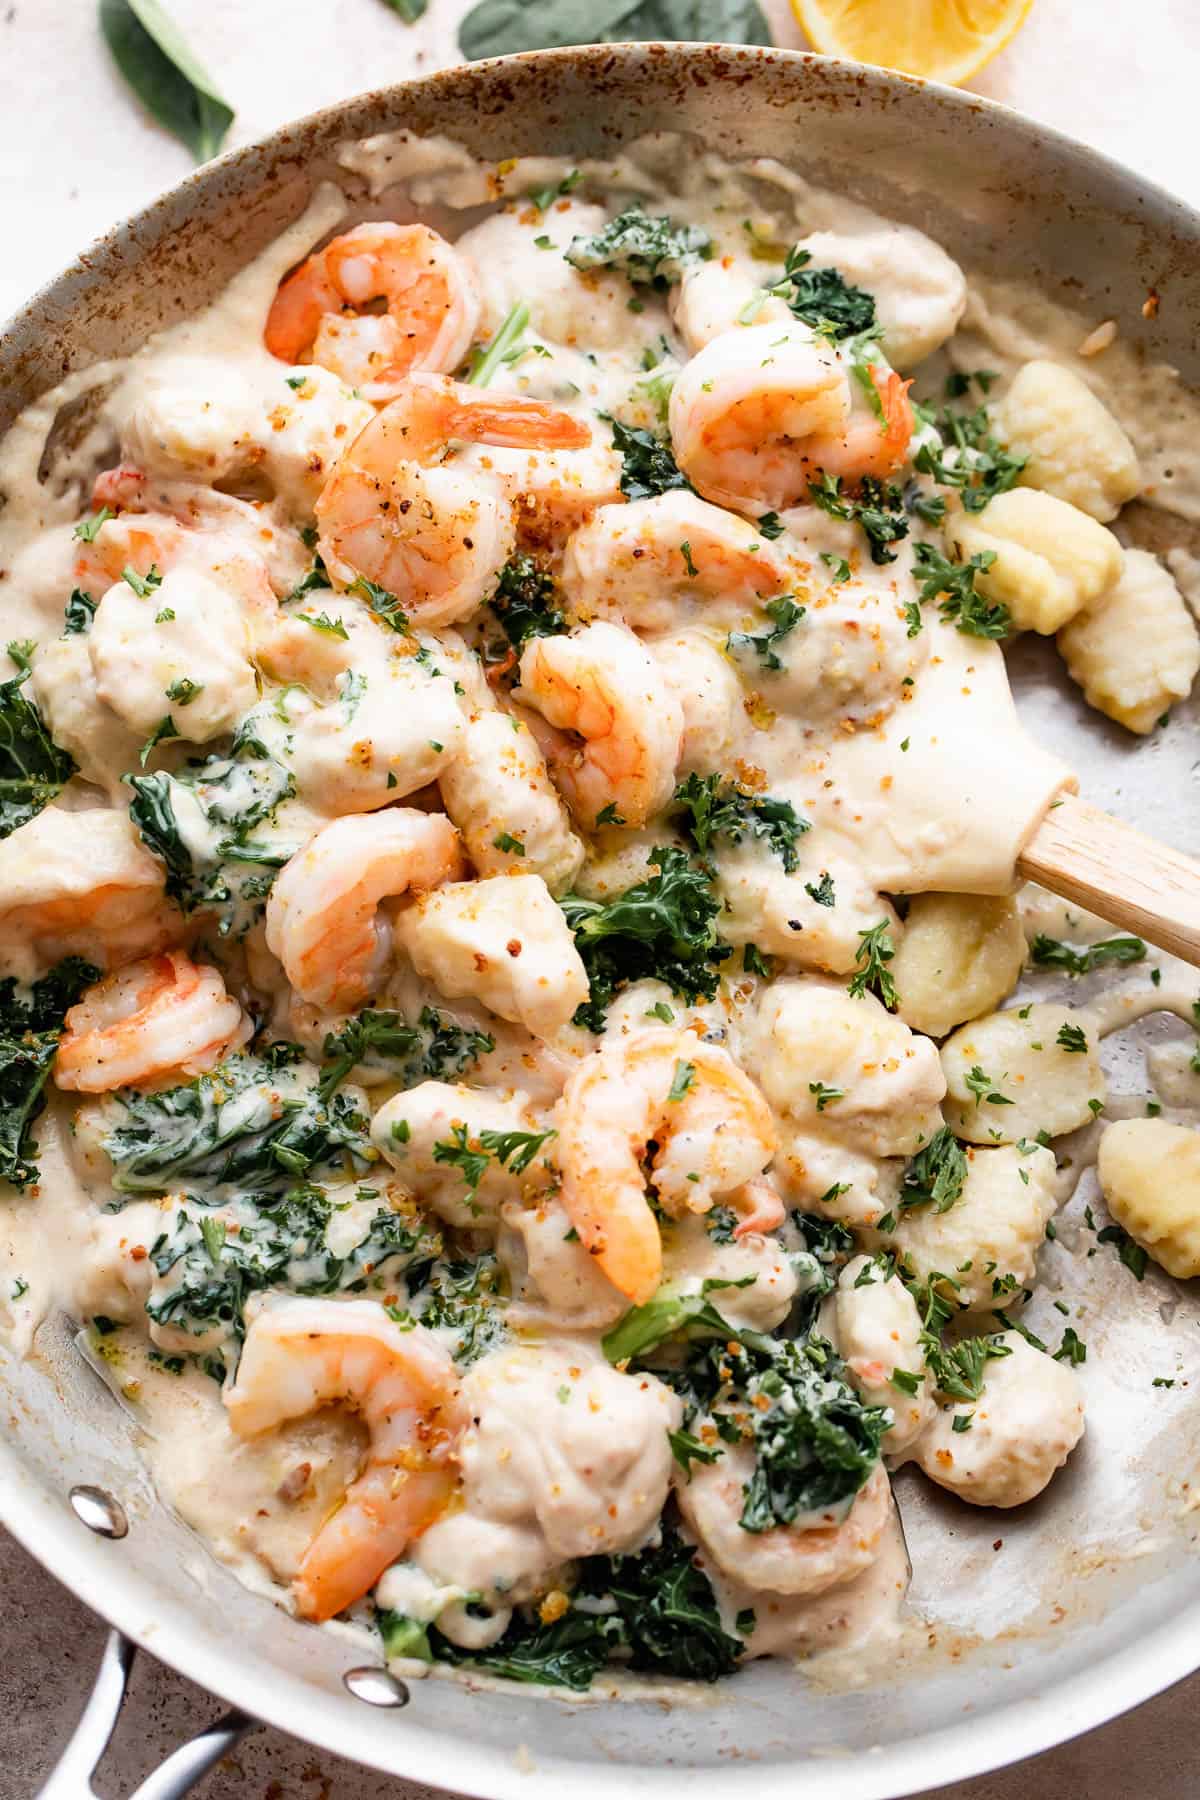 overhead shot of a steel skillet filled with gnocchi, shrimp, and greens.